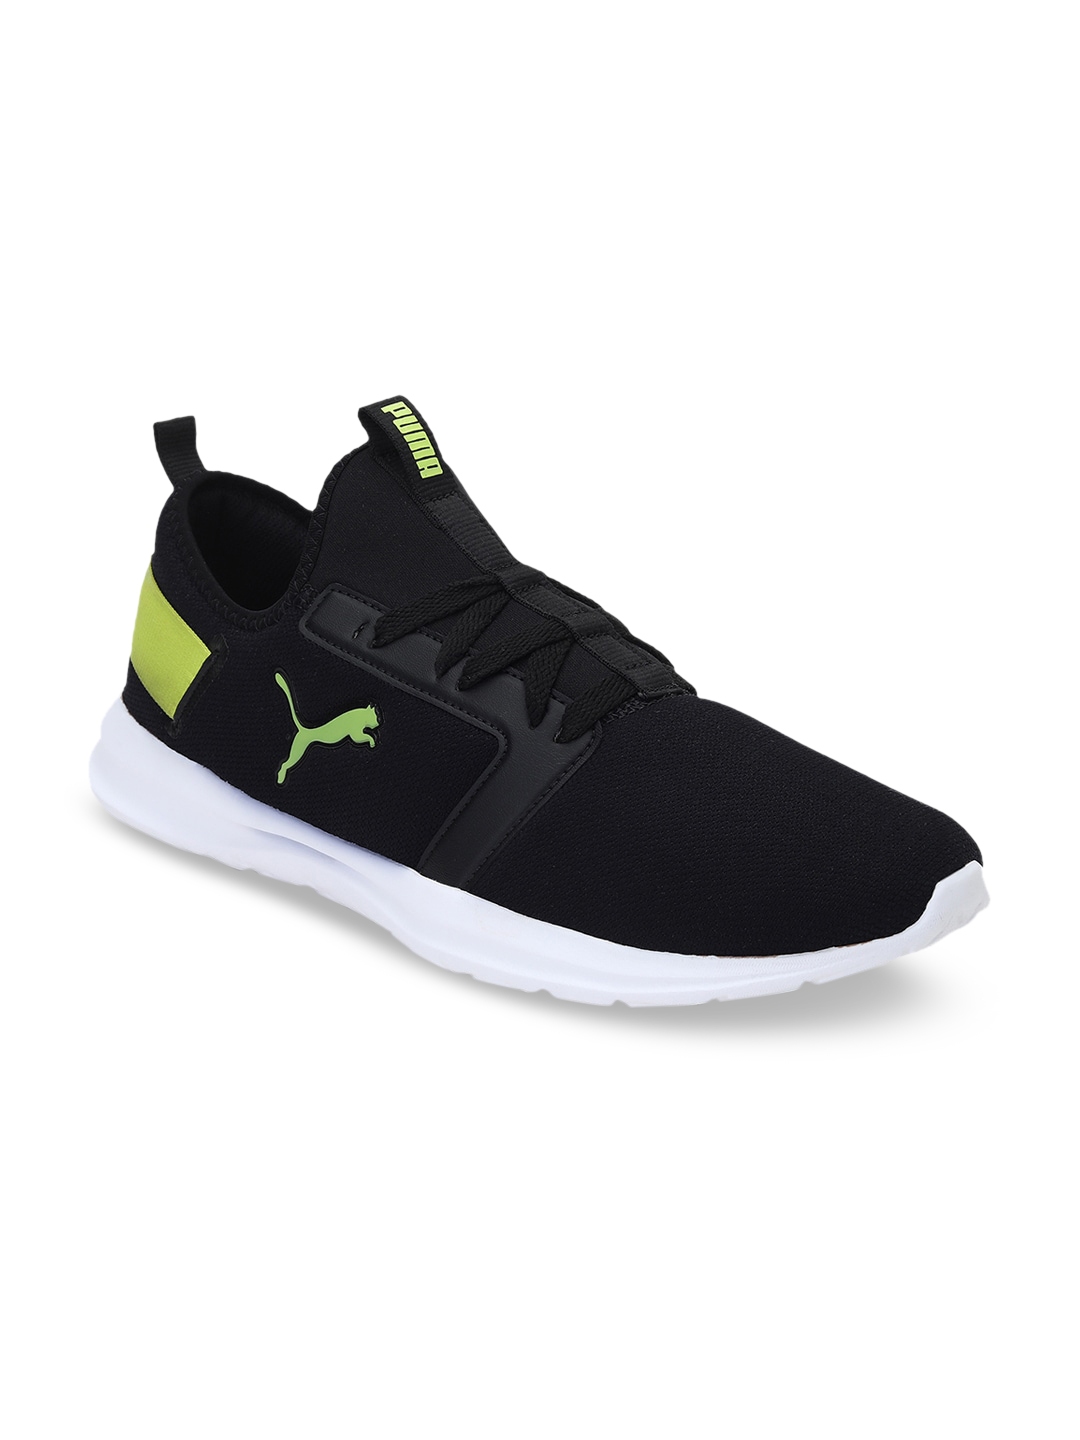 Buy Puma Men Black Fluorescent Green Bold Extreme Sneakers - Casual ...